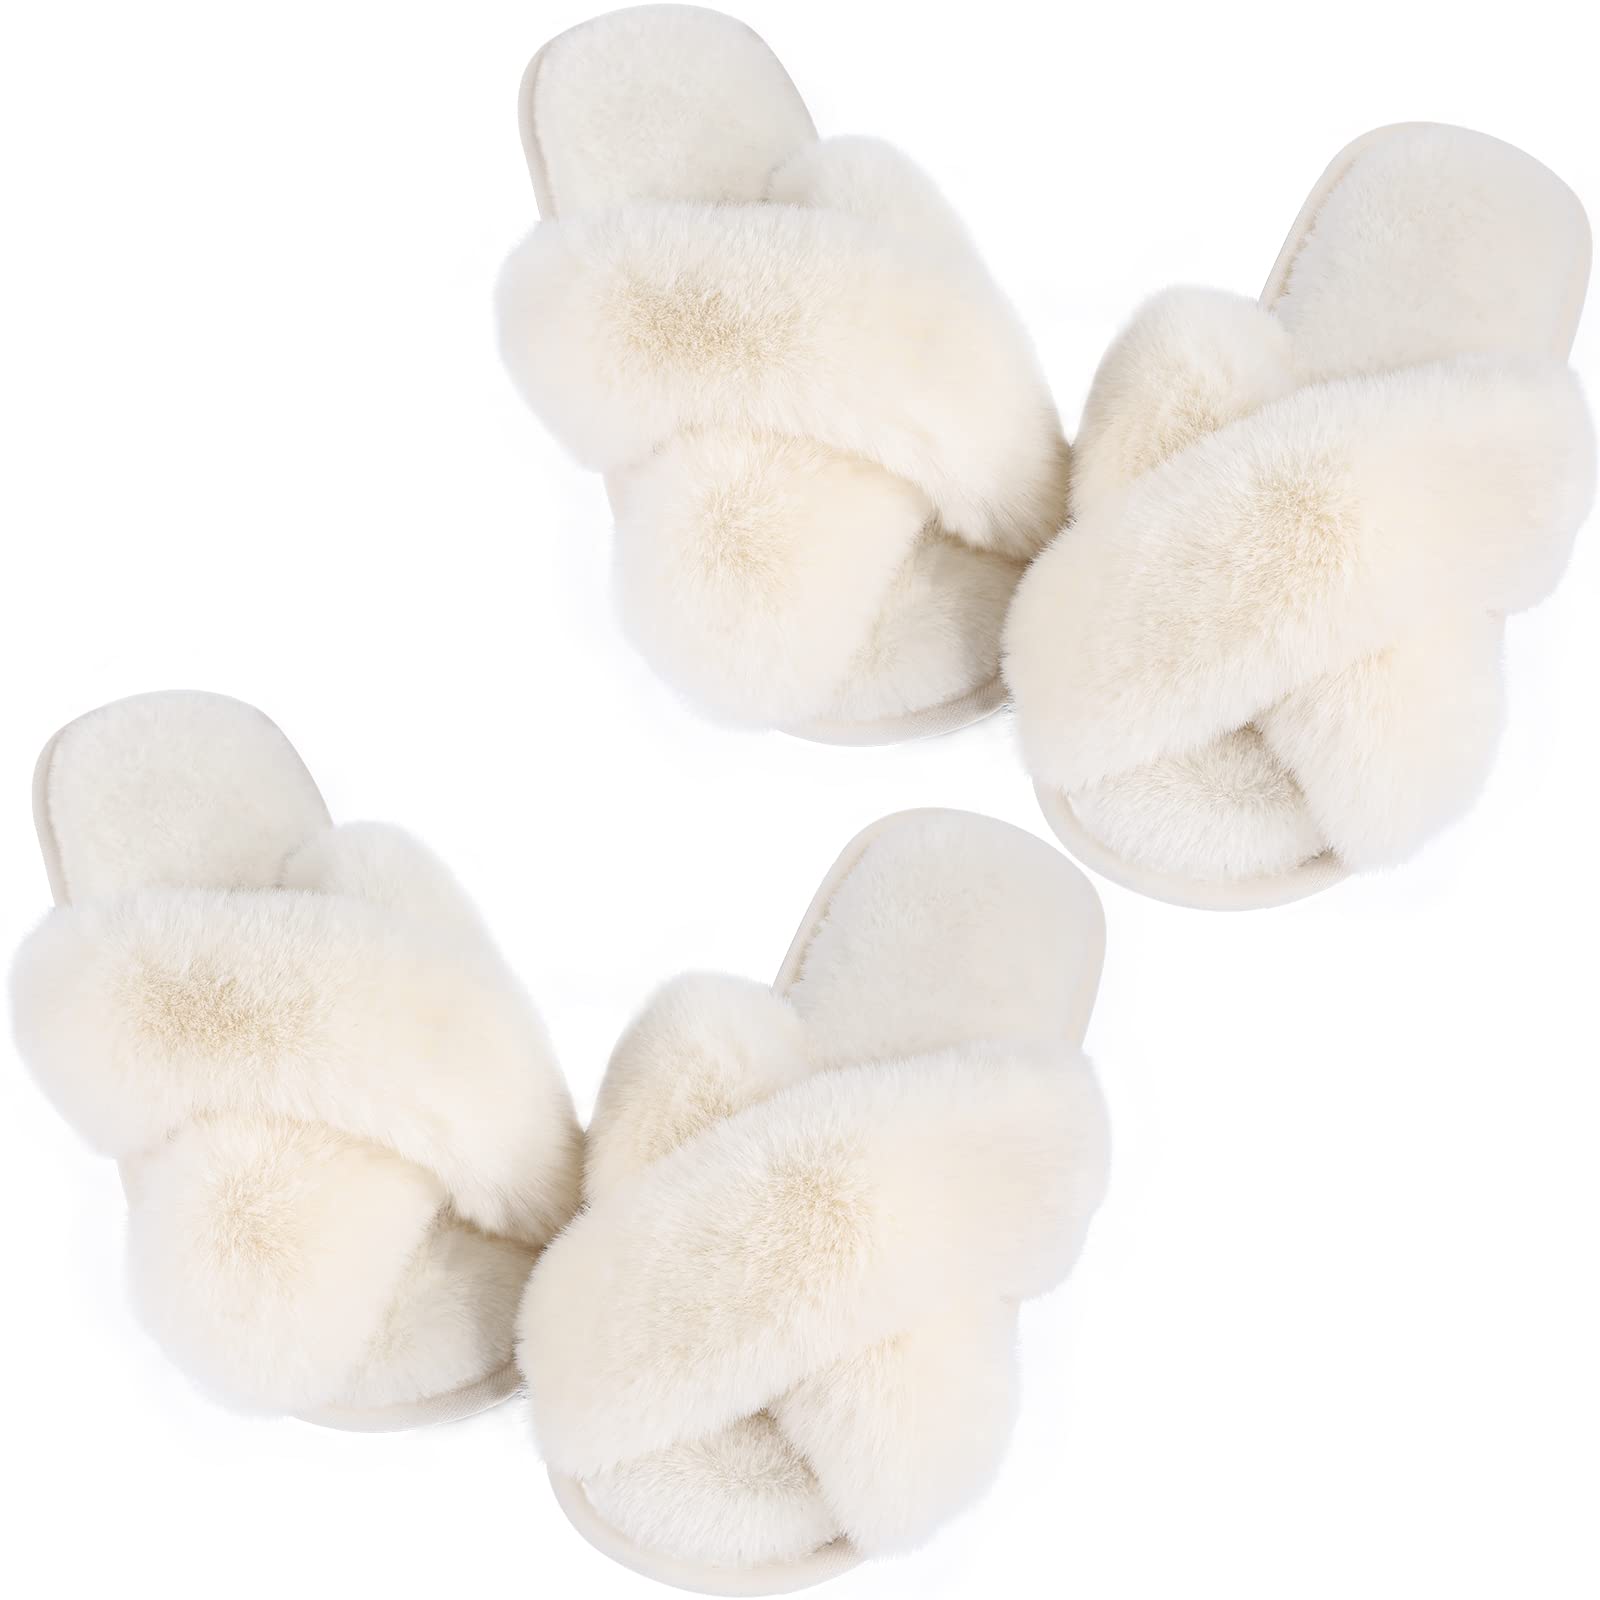 Ankis Womens Fuzzy Fluffy Slippers - 2Pair Cozy, Soft, Comfy, Relax Fluffy Slippers, Cross Band, Open Toe, Non-slip Womens Slippers, Indoor and Outdoor Fluffy Slippers, Fuzzy Slippers